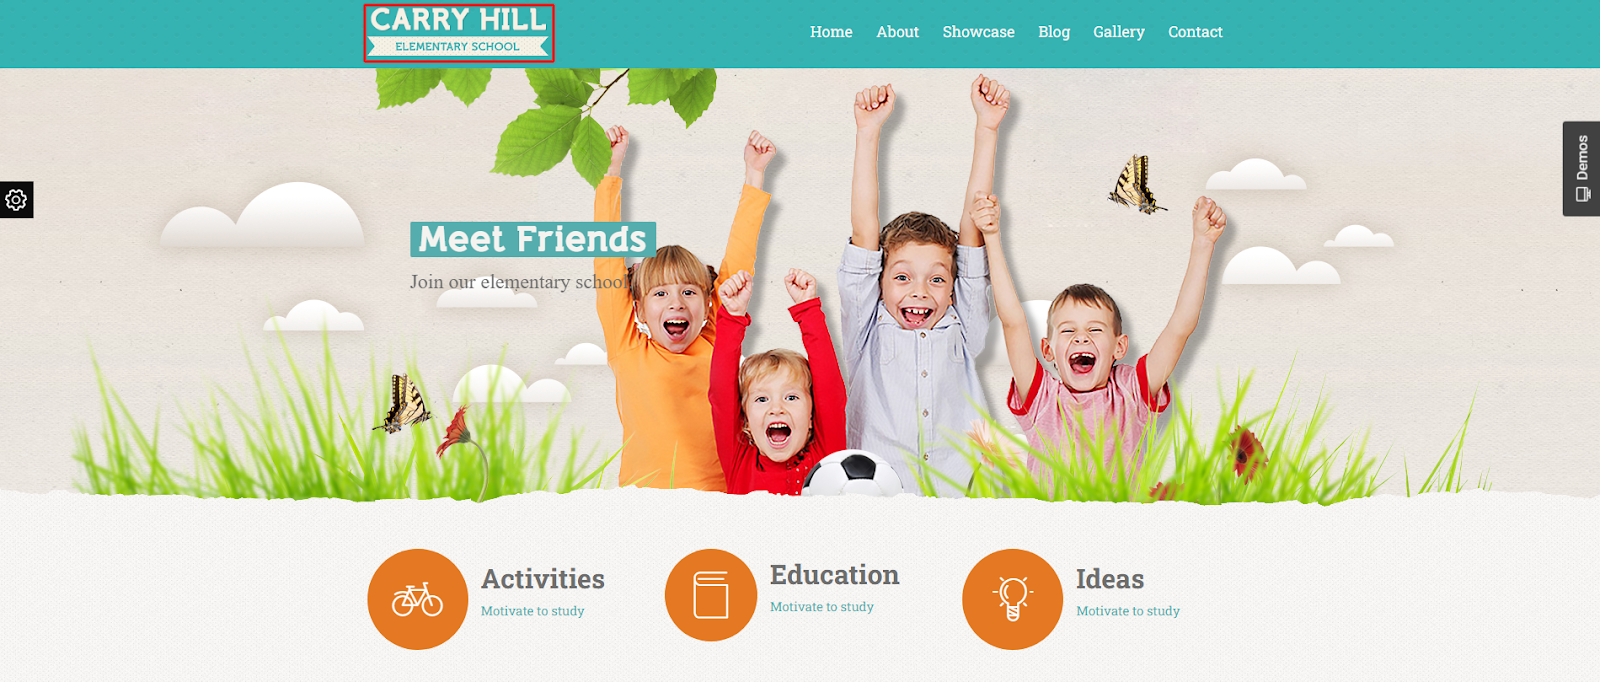 Carry Hill School - Education WP Theme 